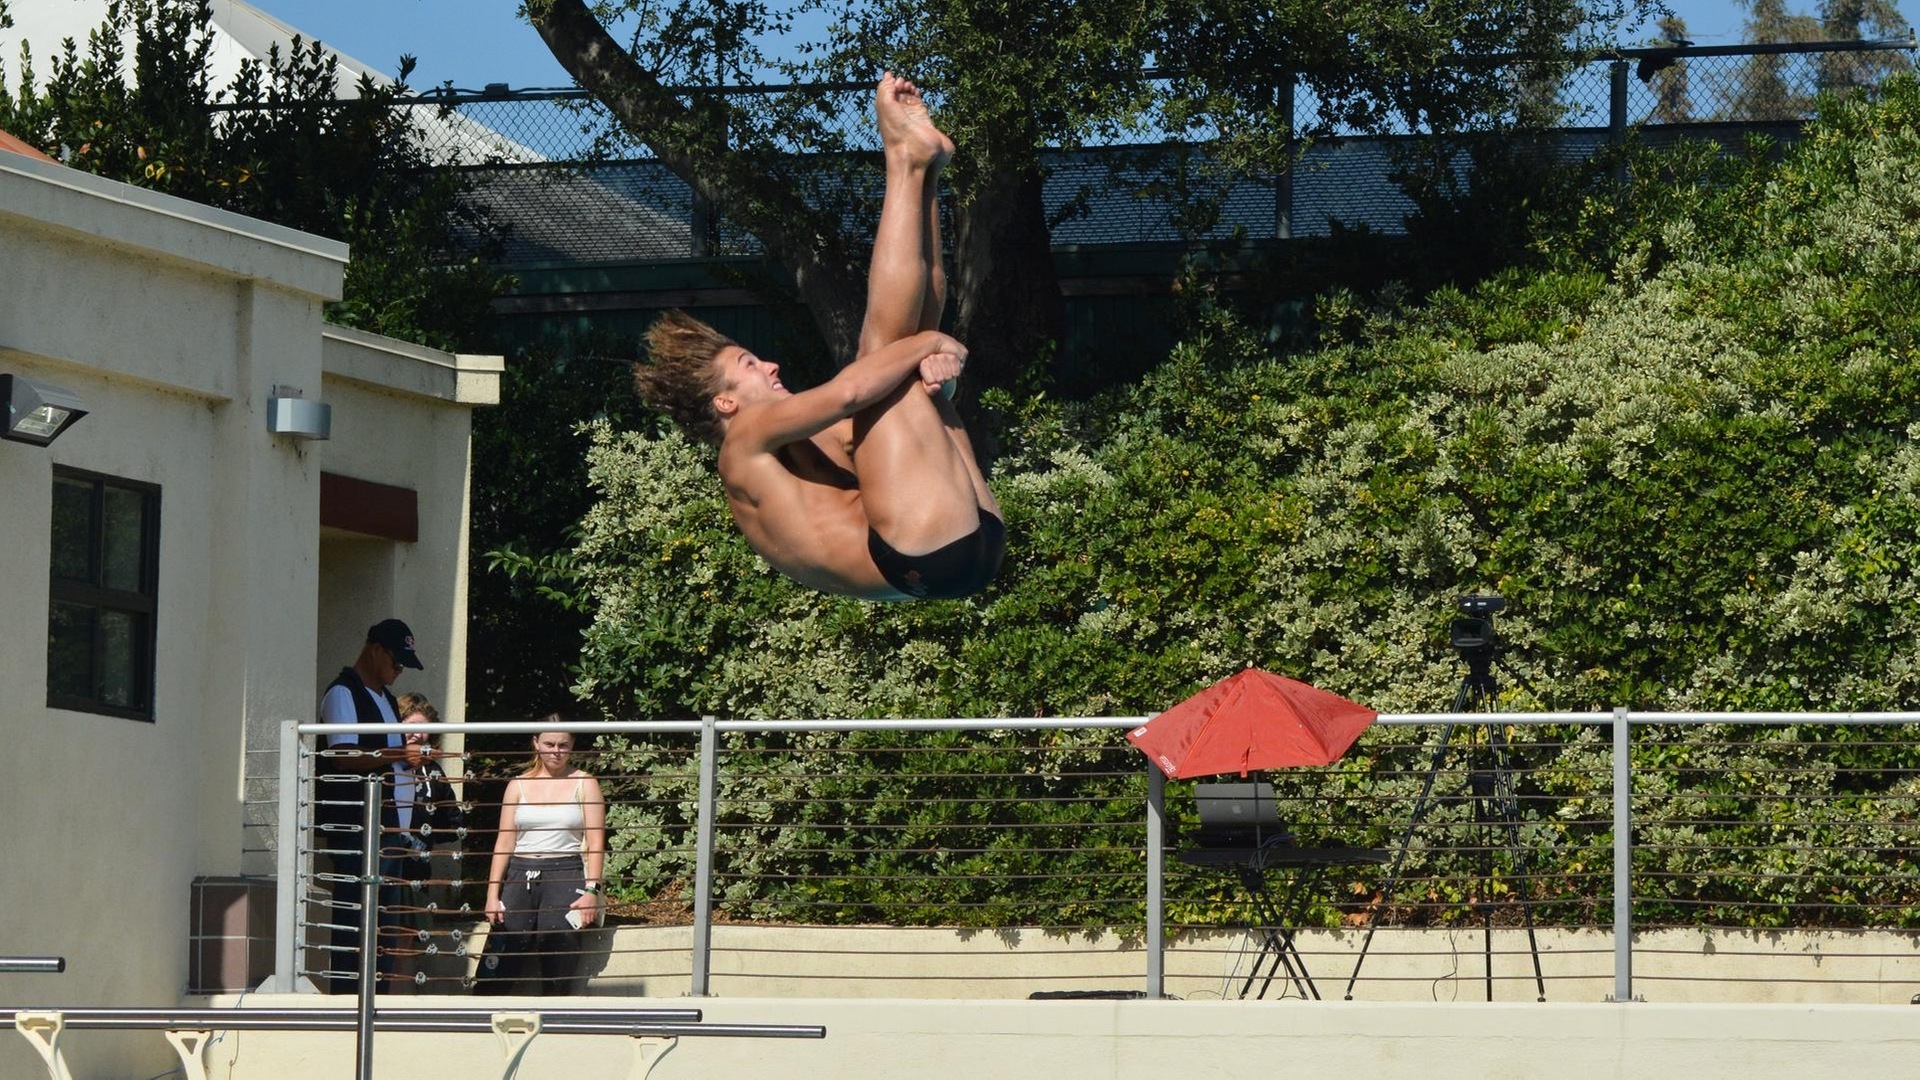 Cyrus Gaylord won the one-meter in his final tuneup before SCIACs